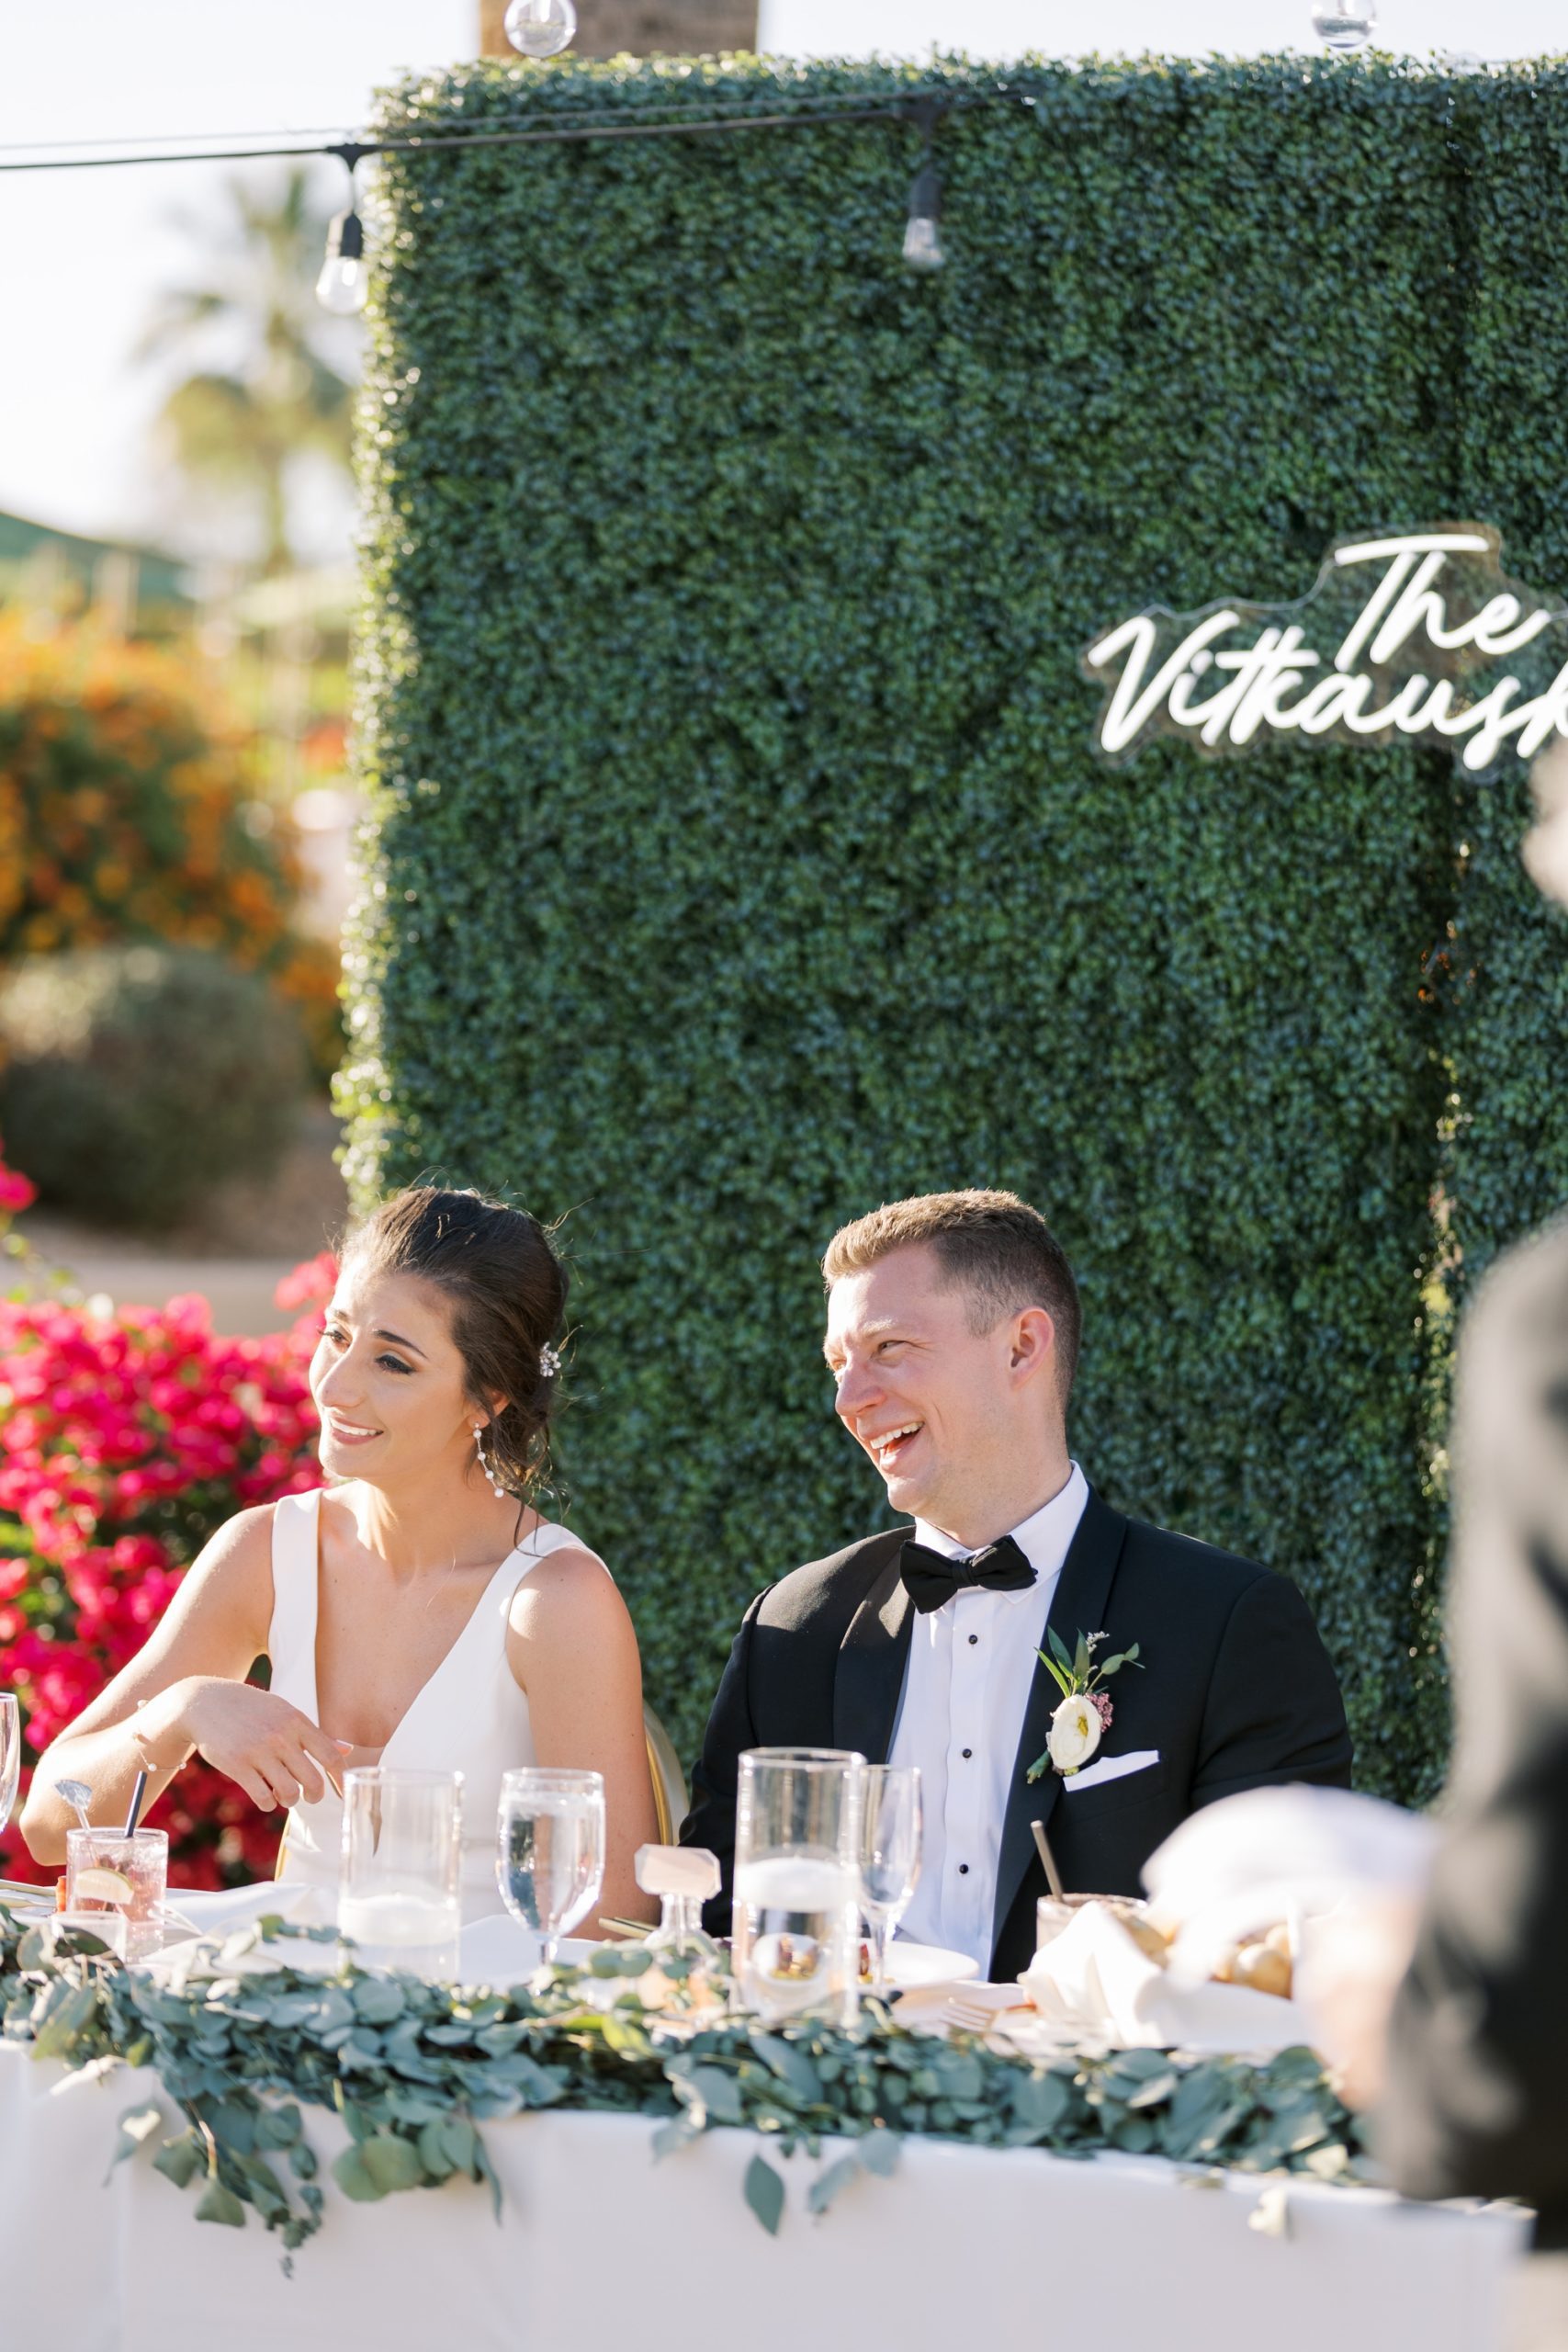 The bride and groom laughed during the toasts at their Camelback Inn in Scottsdale wedding